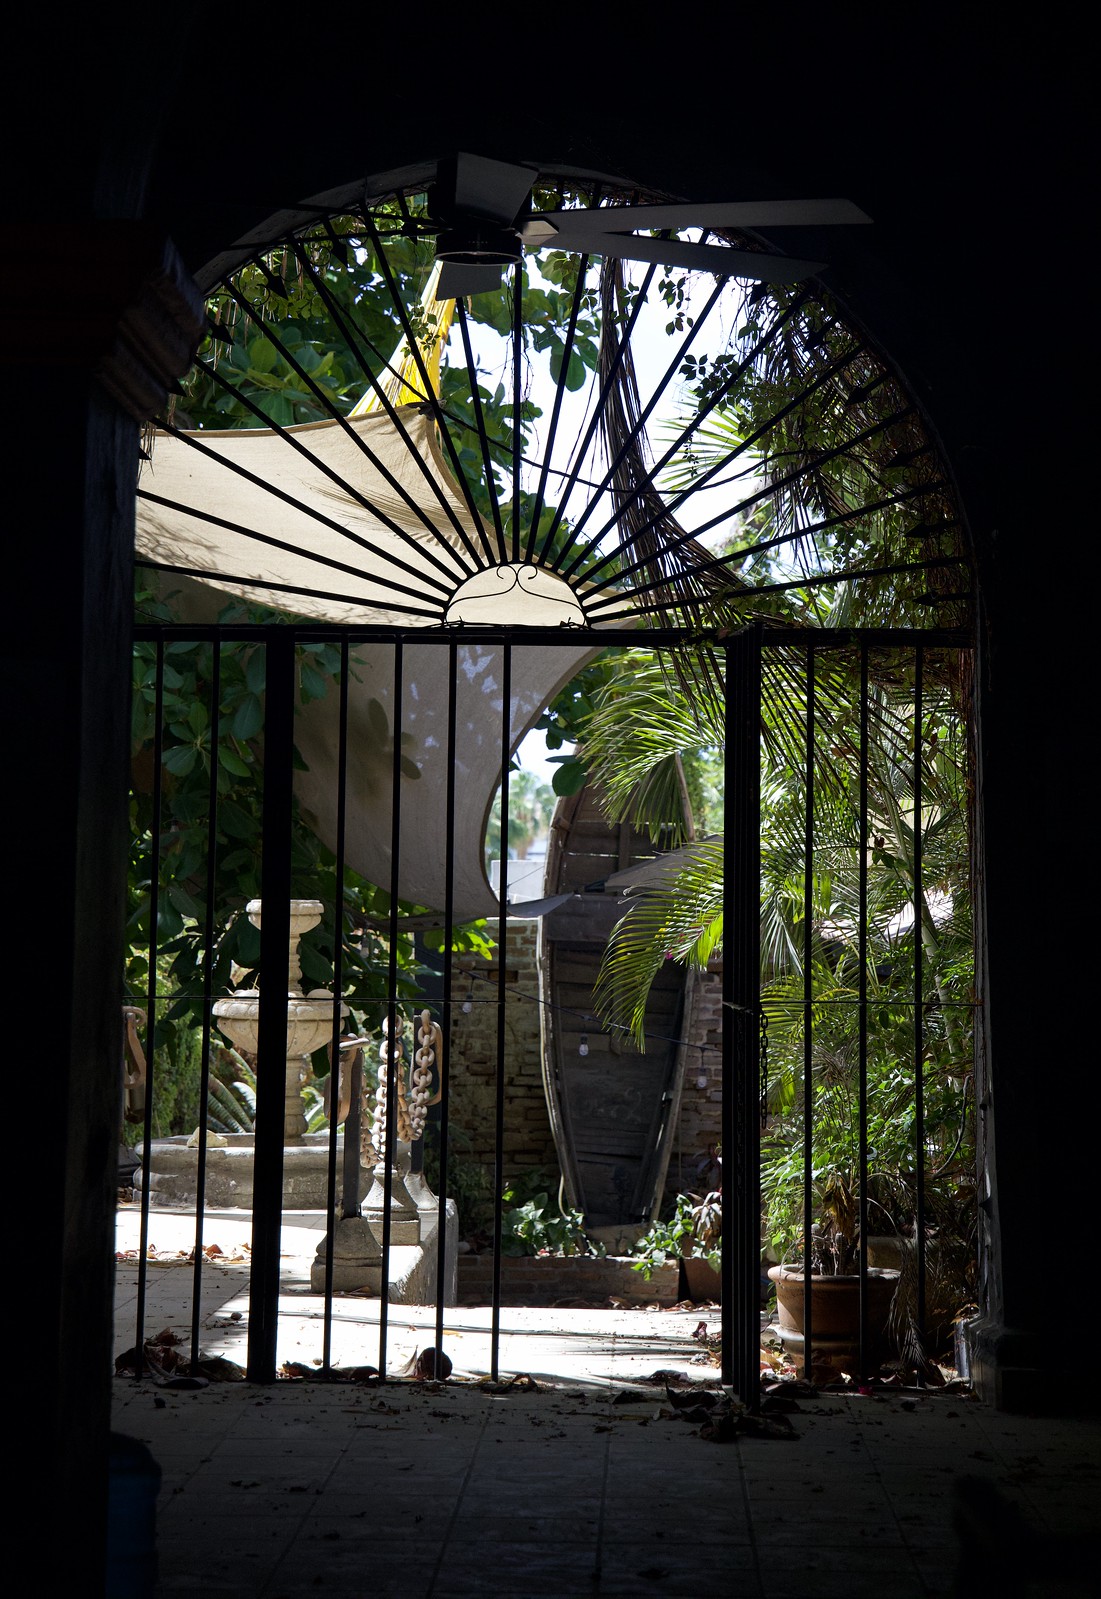 A peaceful and shady courtyard off the street